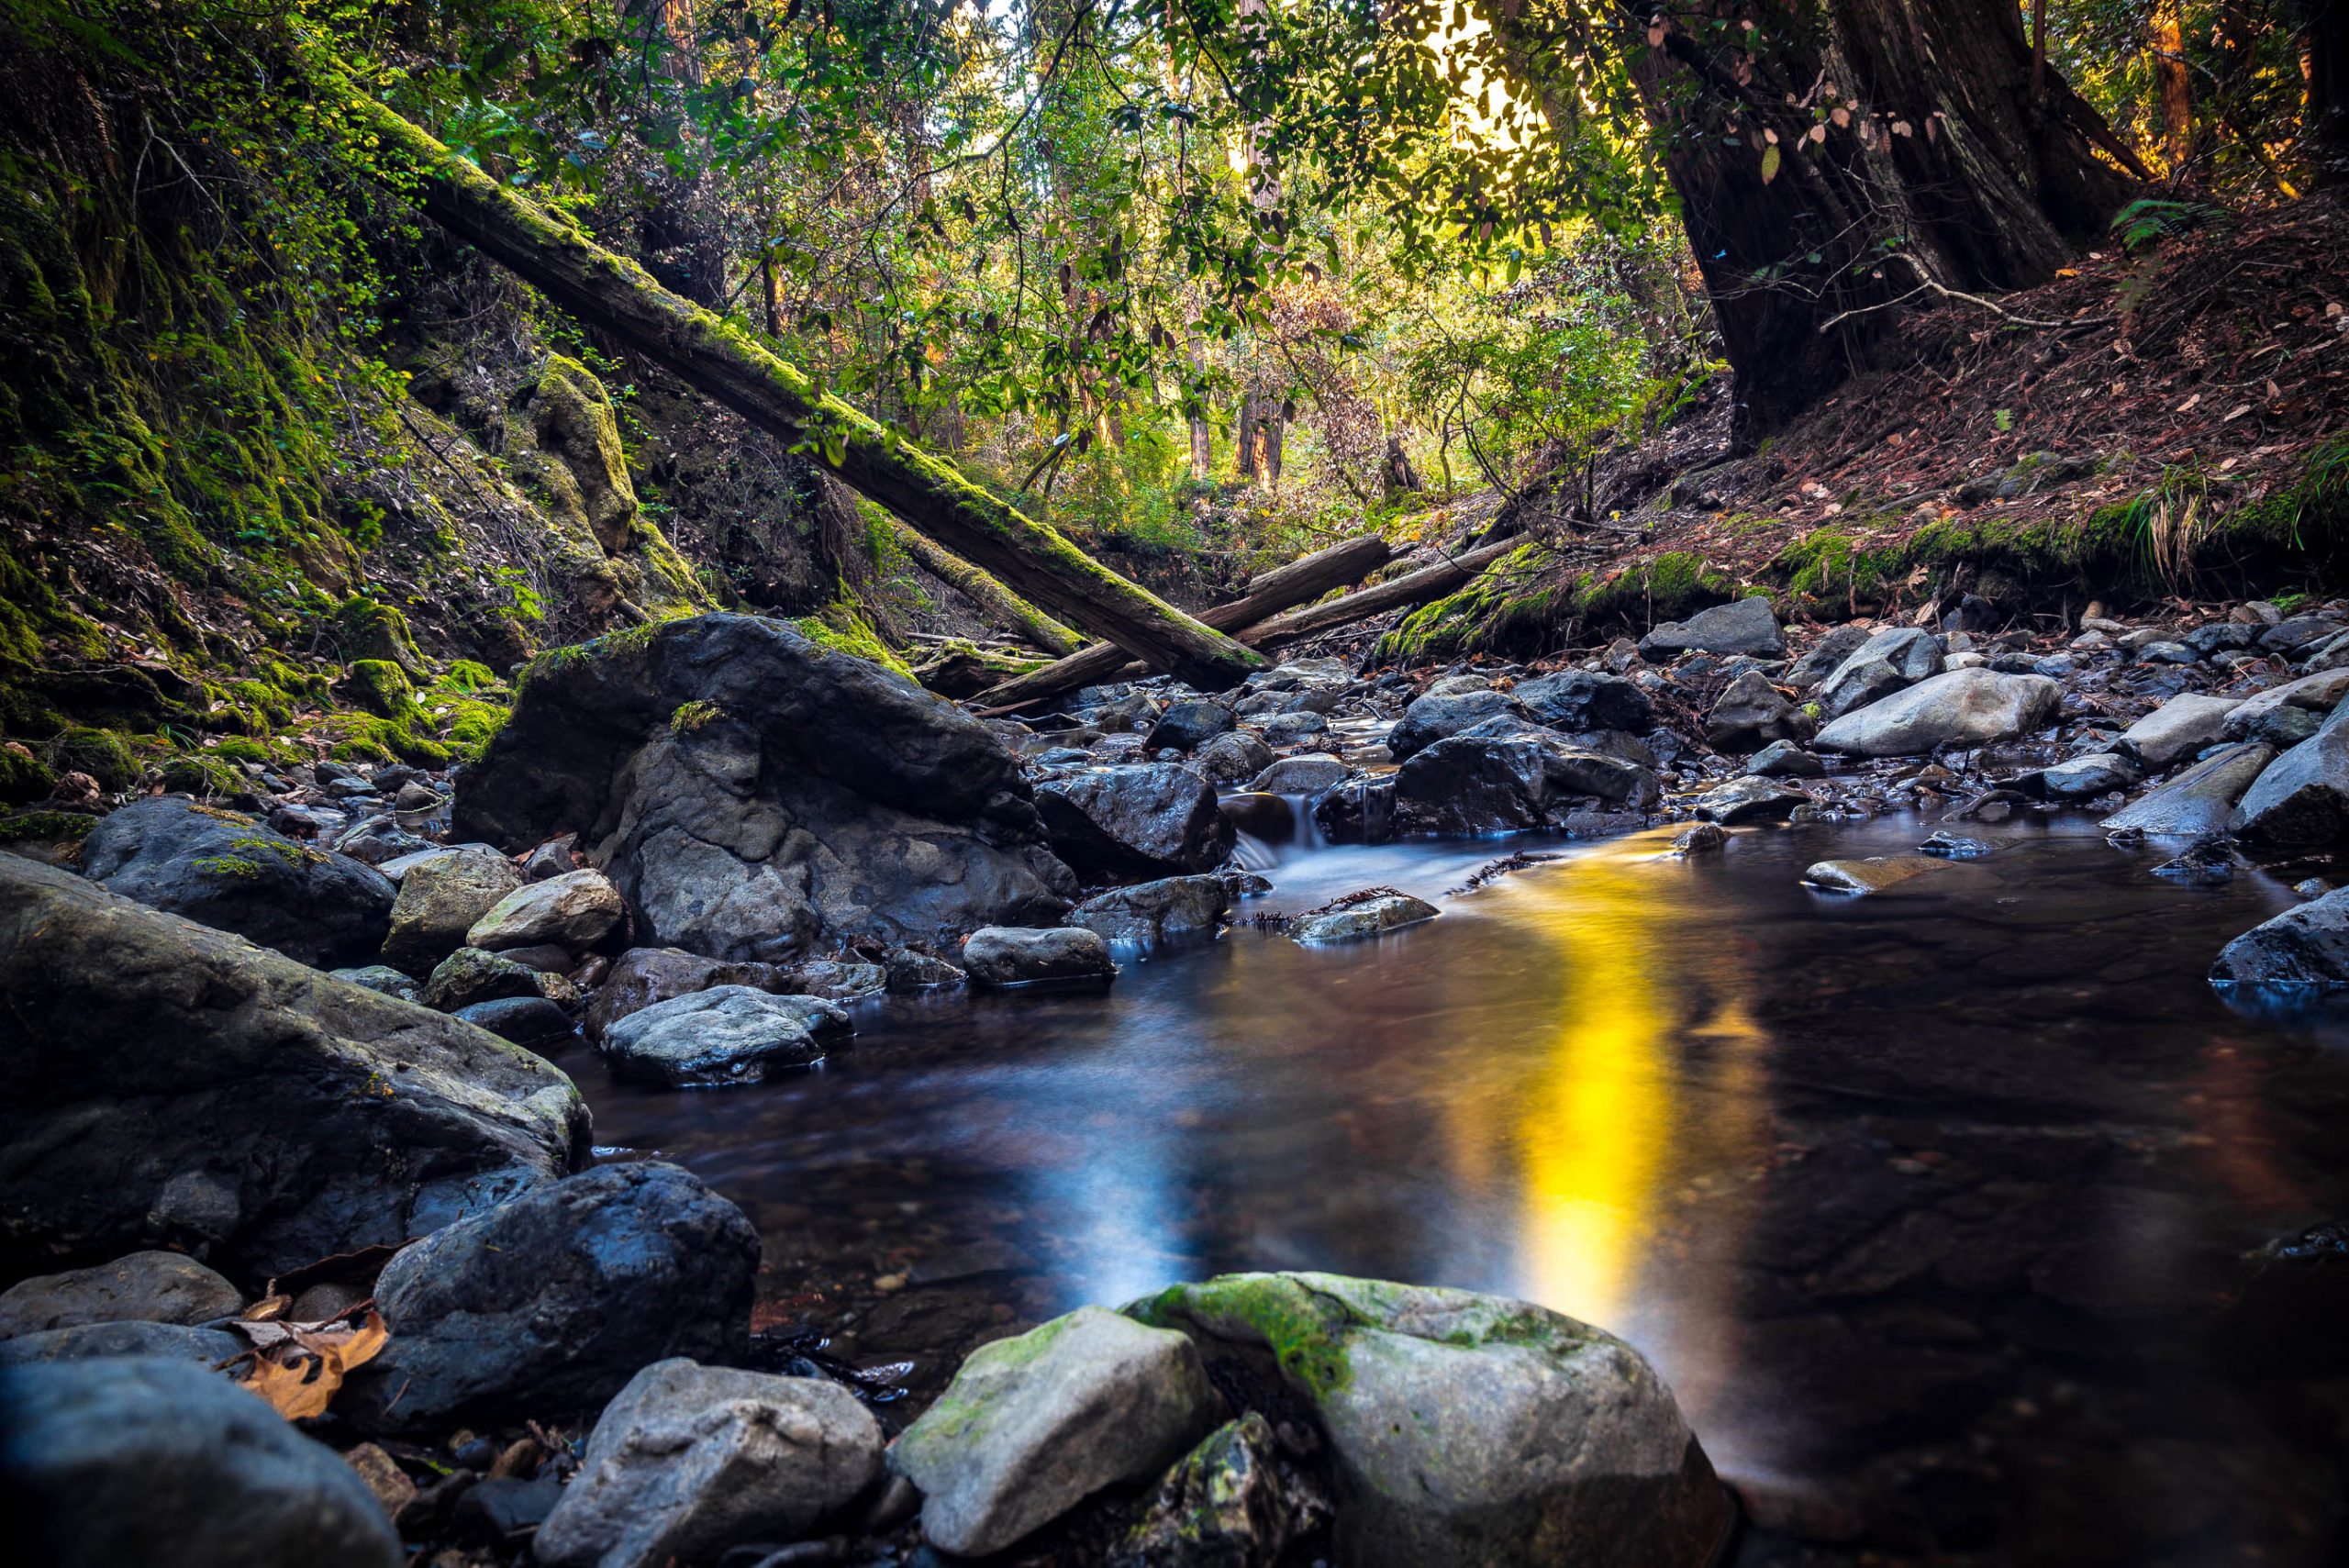 Nature Photography in Muir Woods National Park